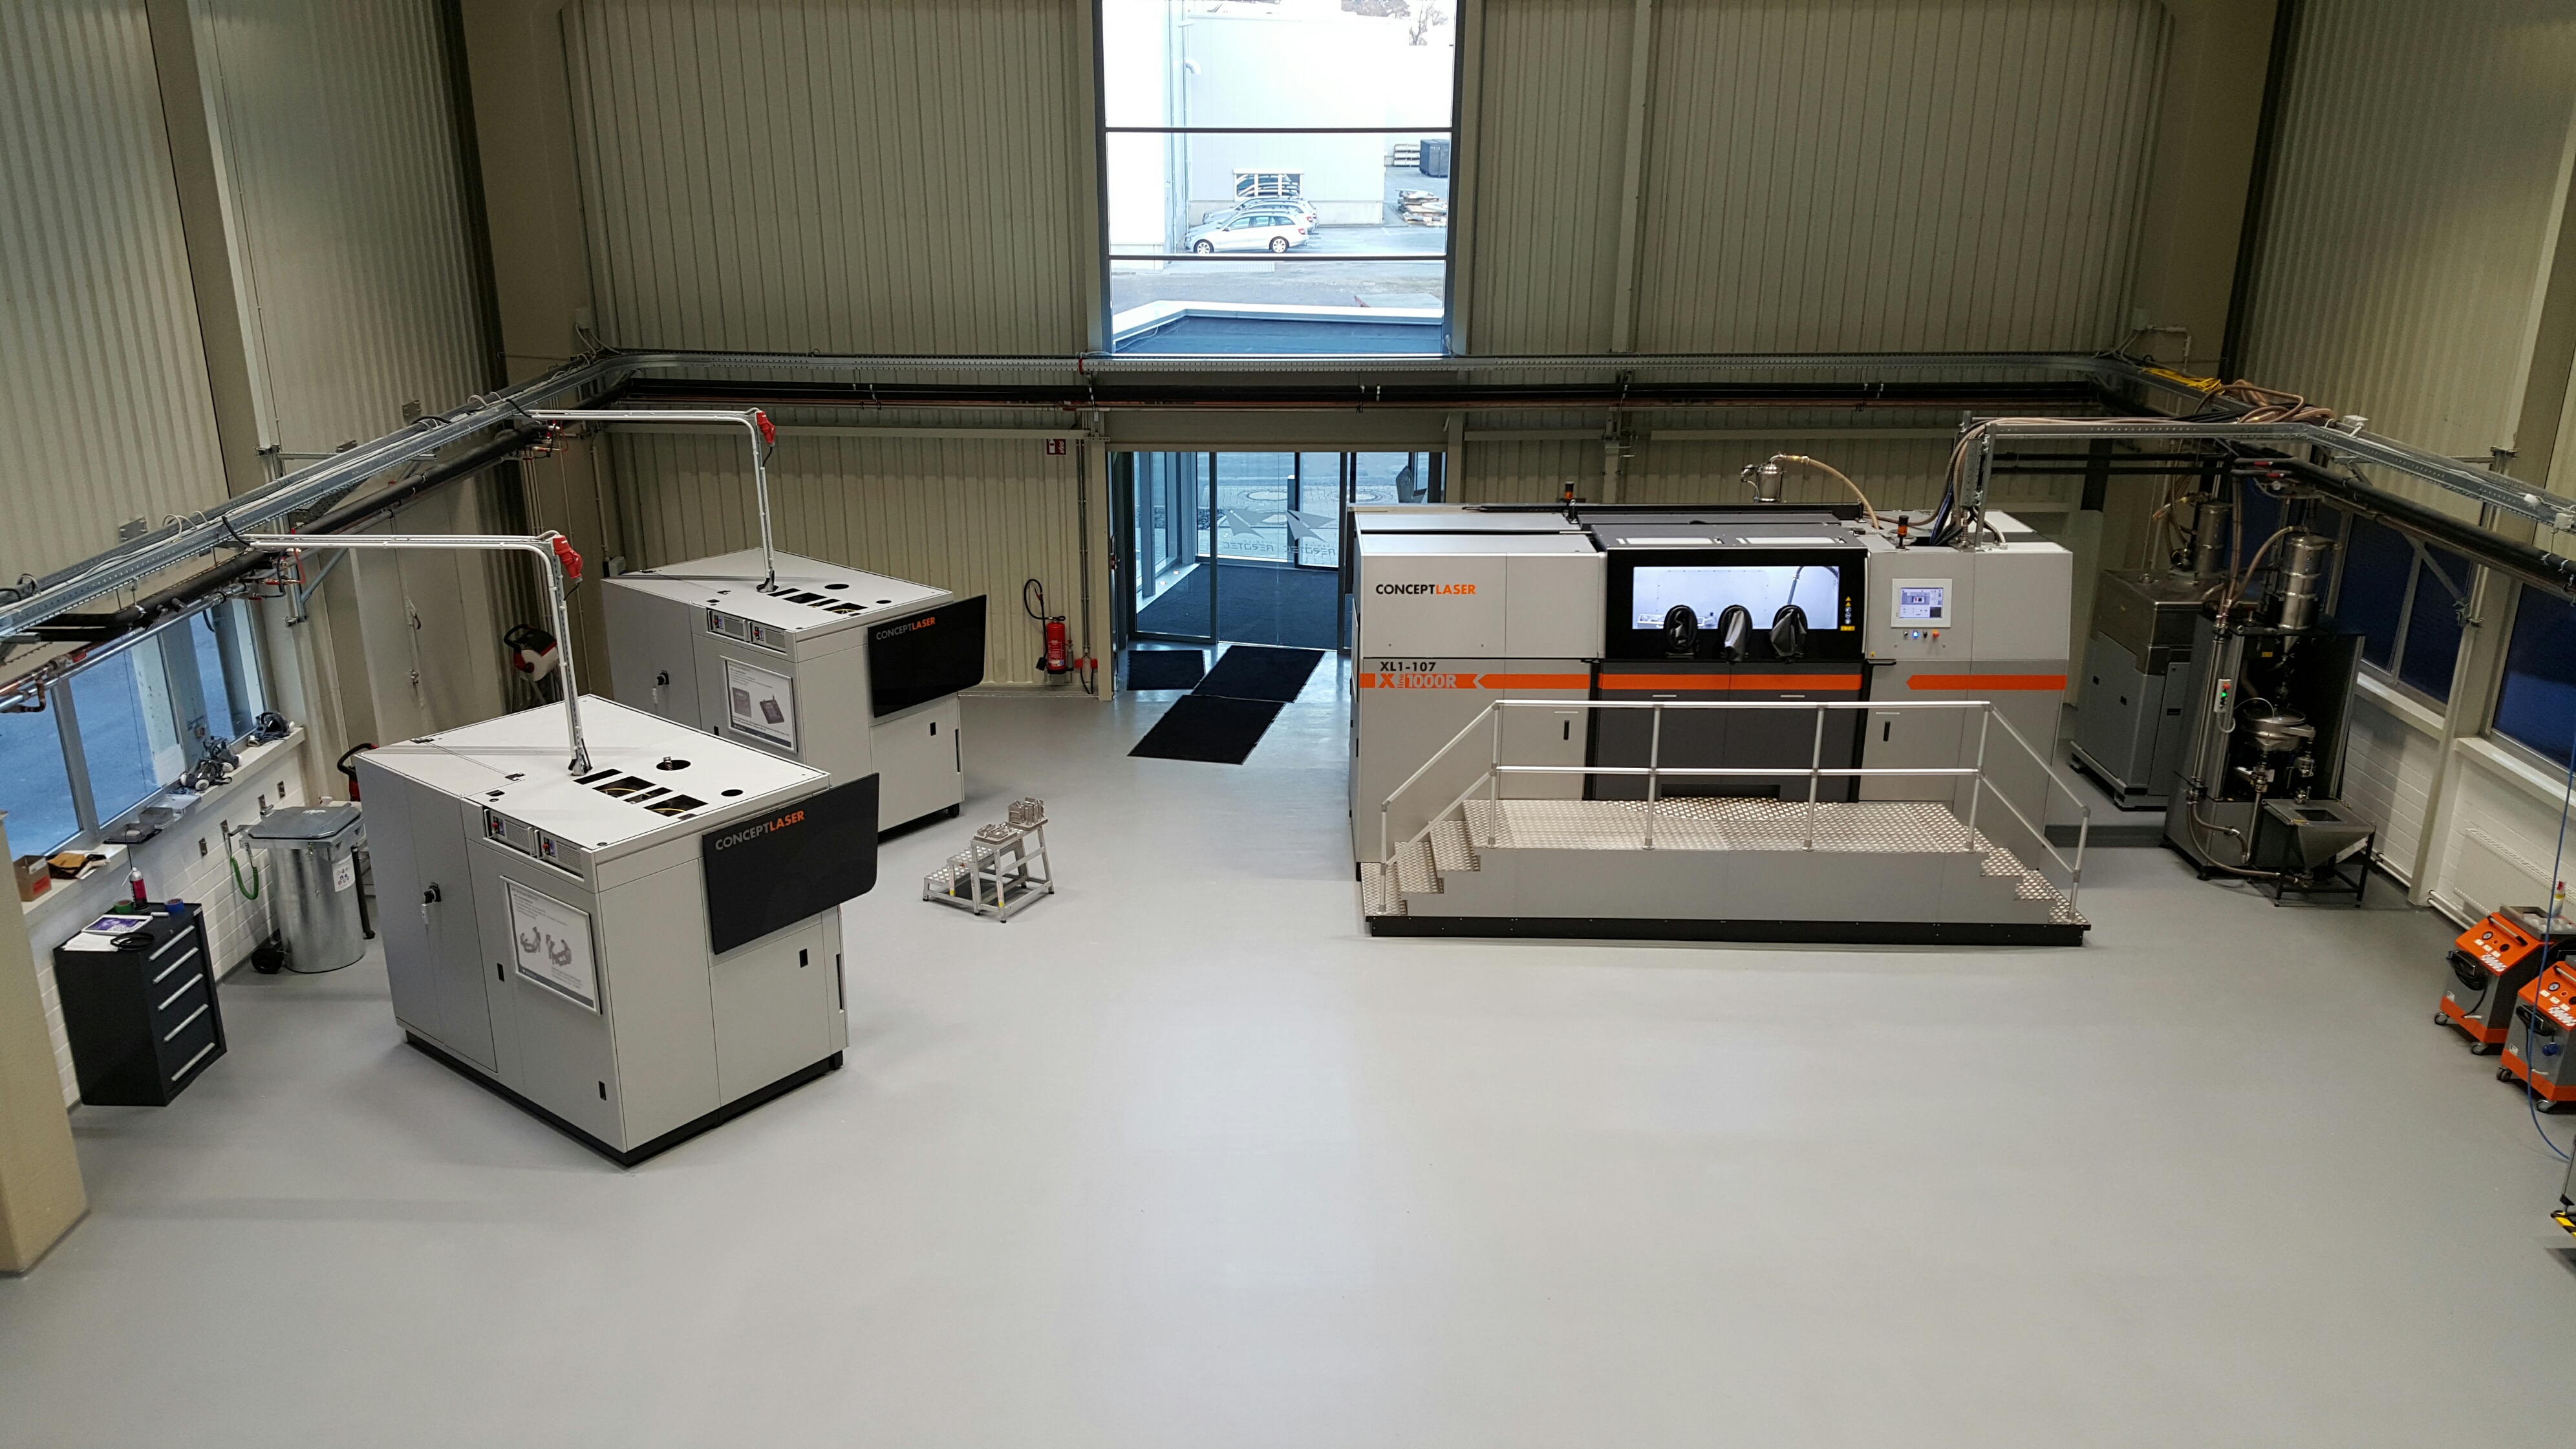 LaserCUSING machines from Concept Laser in the new production hall in Varel. Image courtesy Premium Aerotec GmbH.